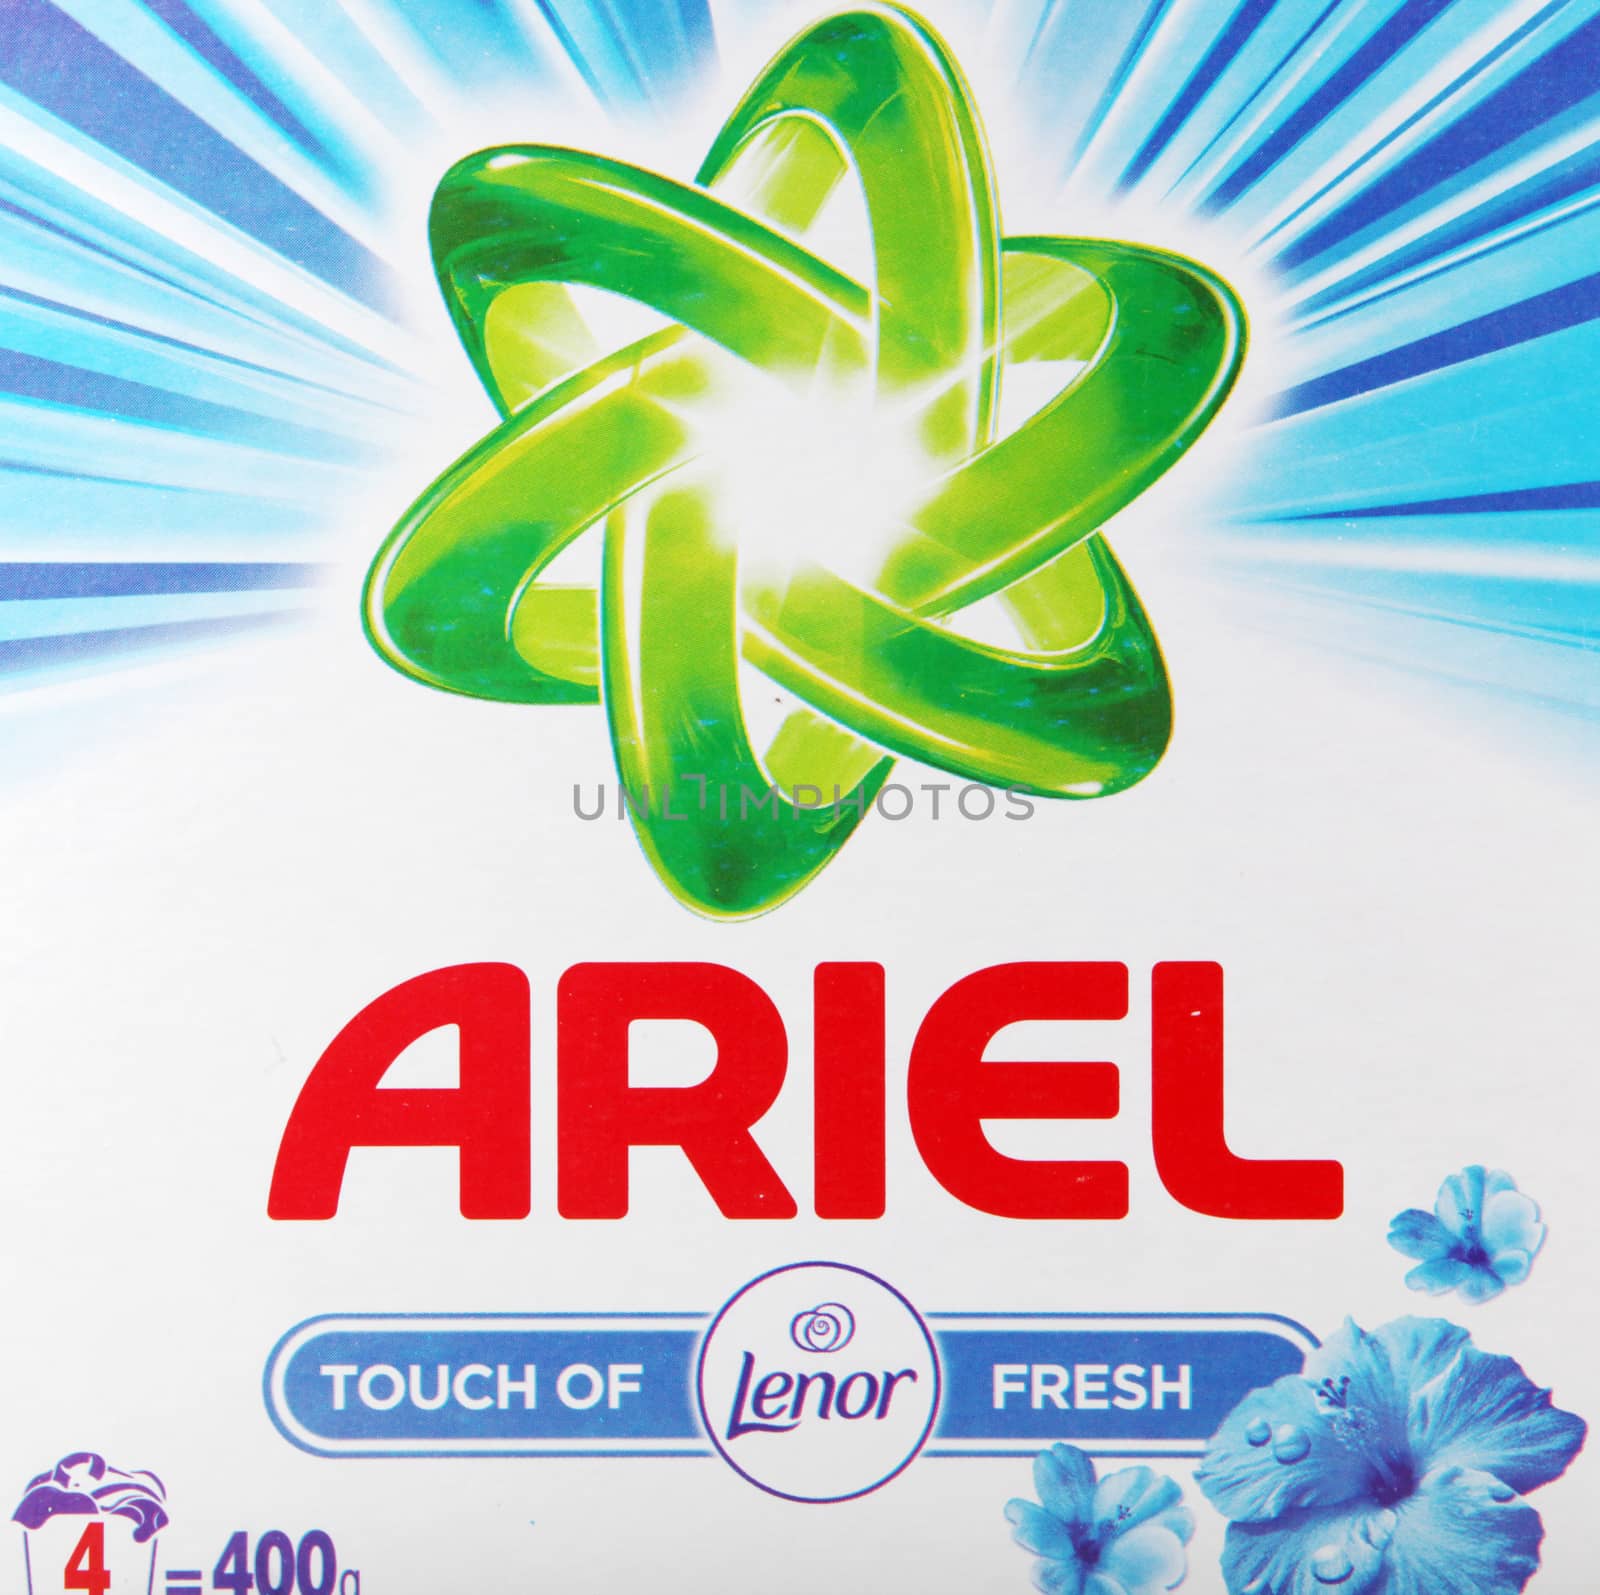 Pomorie, Bulgaria - June 23, 2019: Ariel Is A Marketing Line Of Laundry Detergents Made By Procter & Gamble. by nenovbrothers